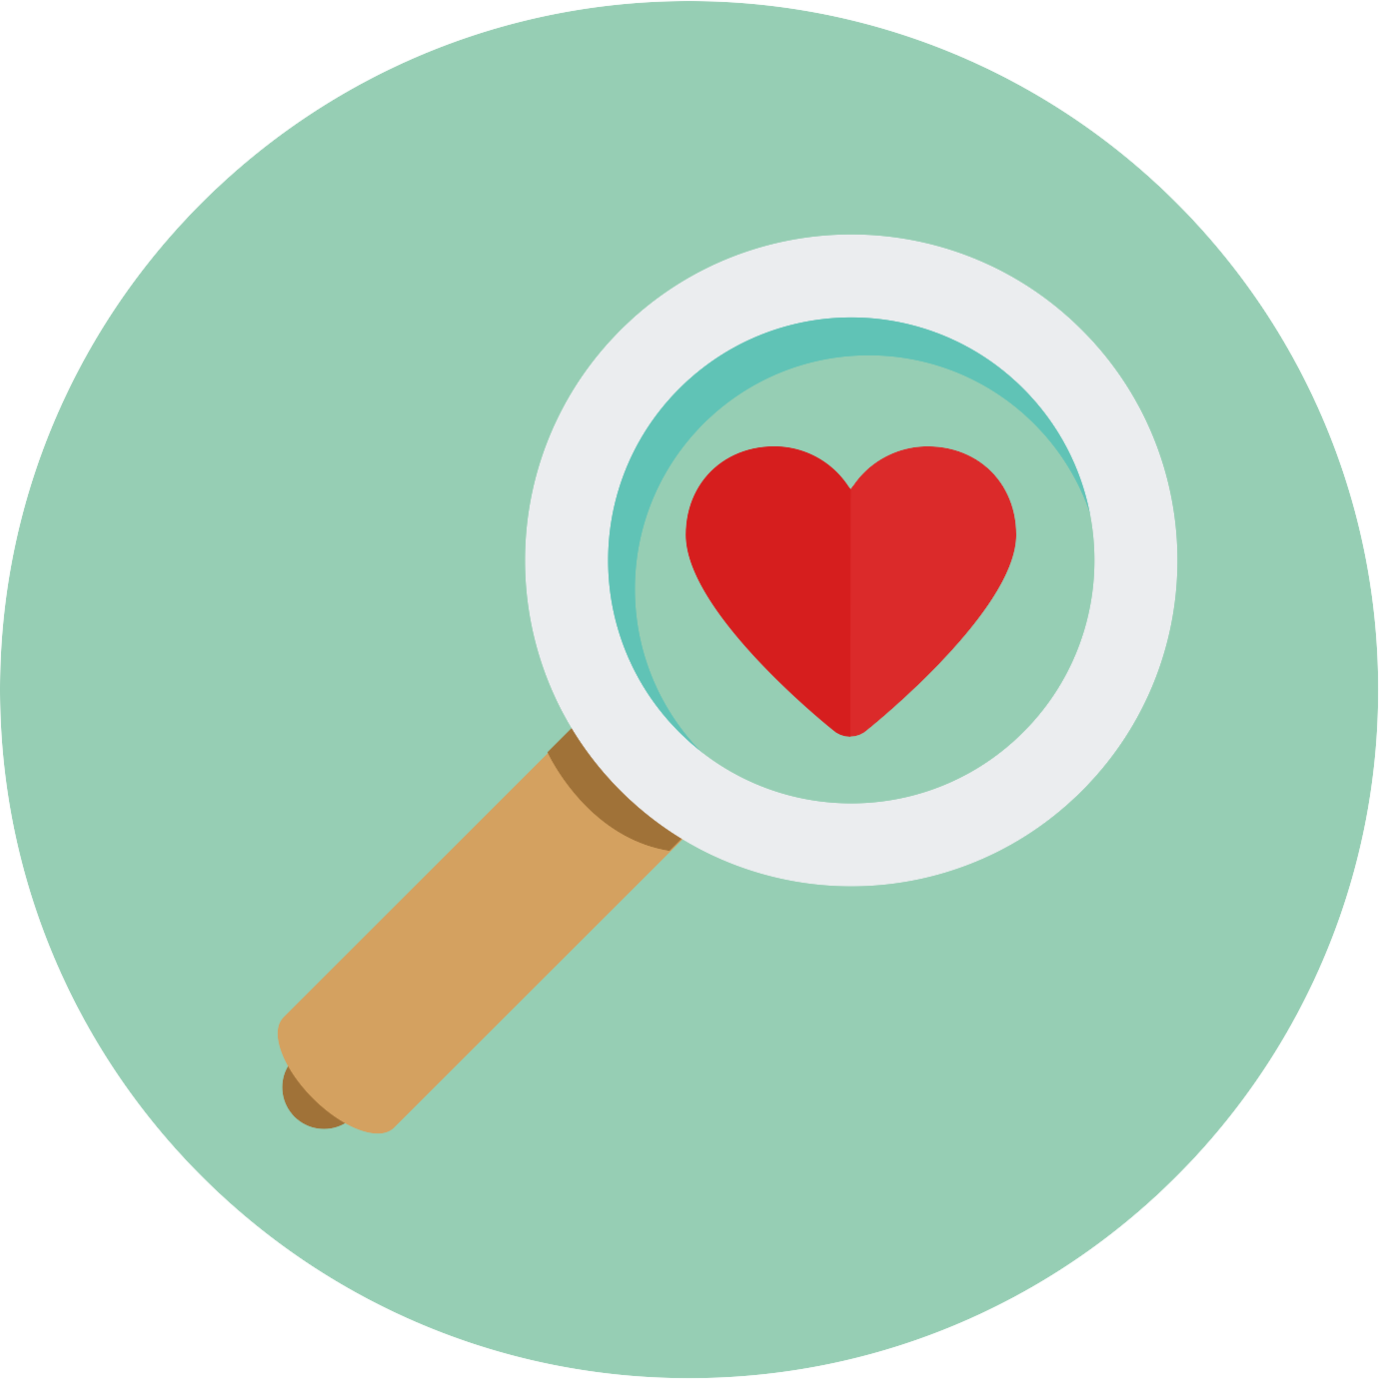 Interpersonal Relationship Love Family Romance Icon - New York Times App Icon (1379x1379), Png Download